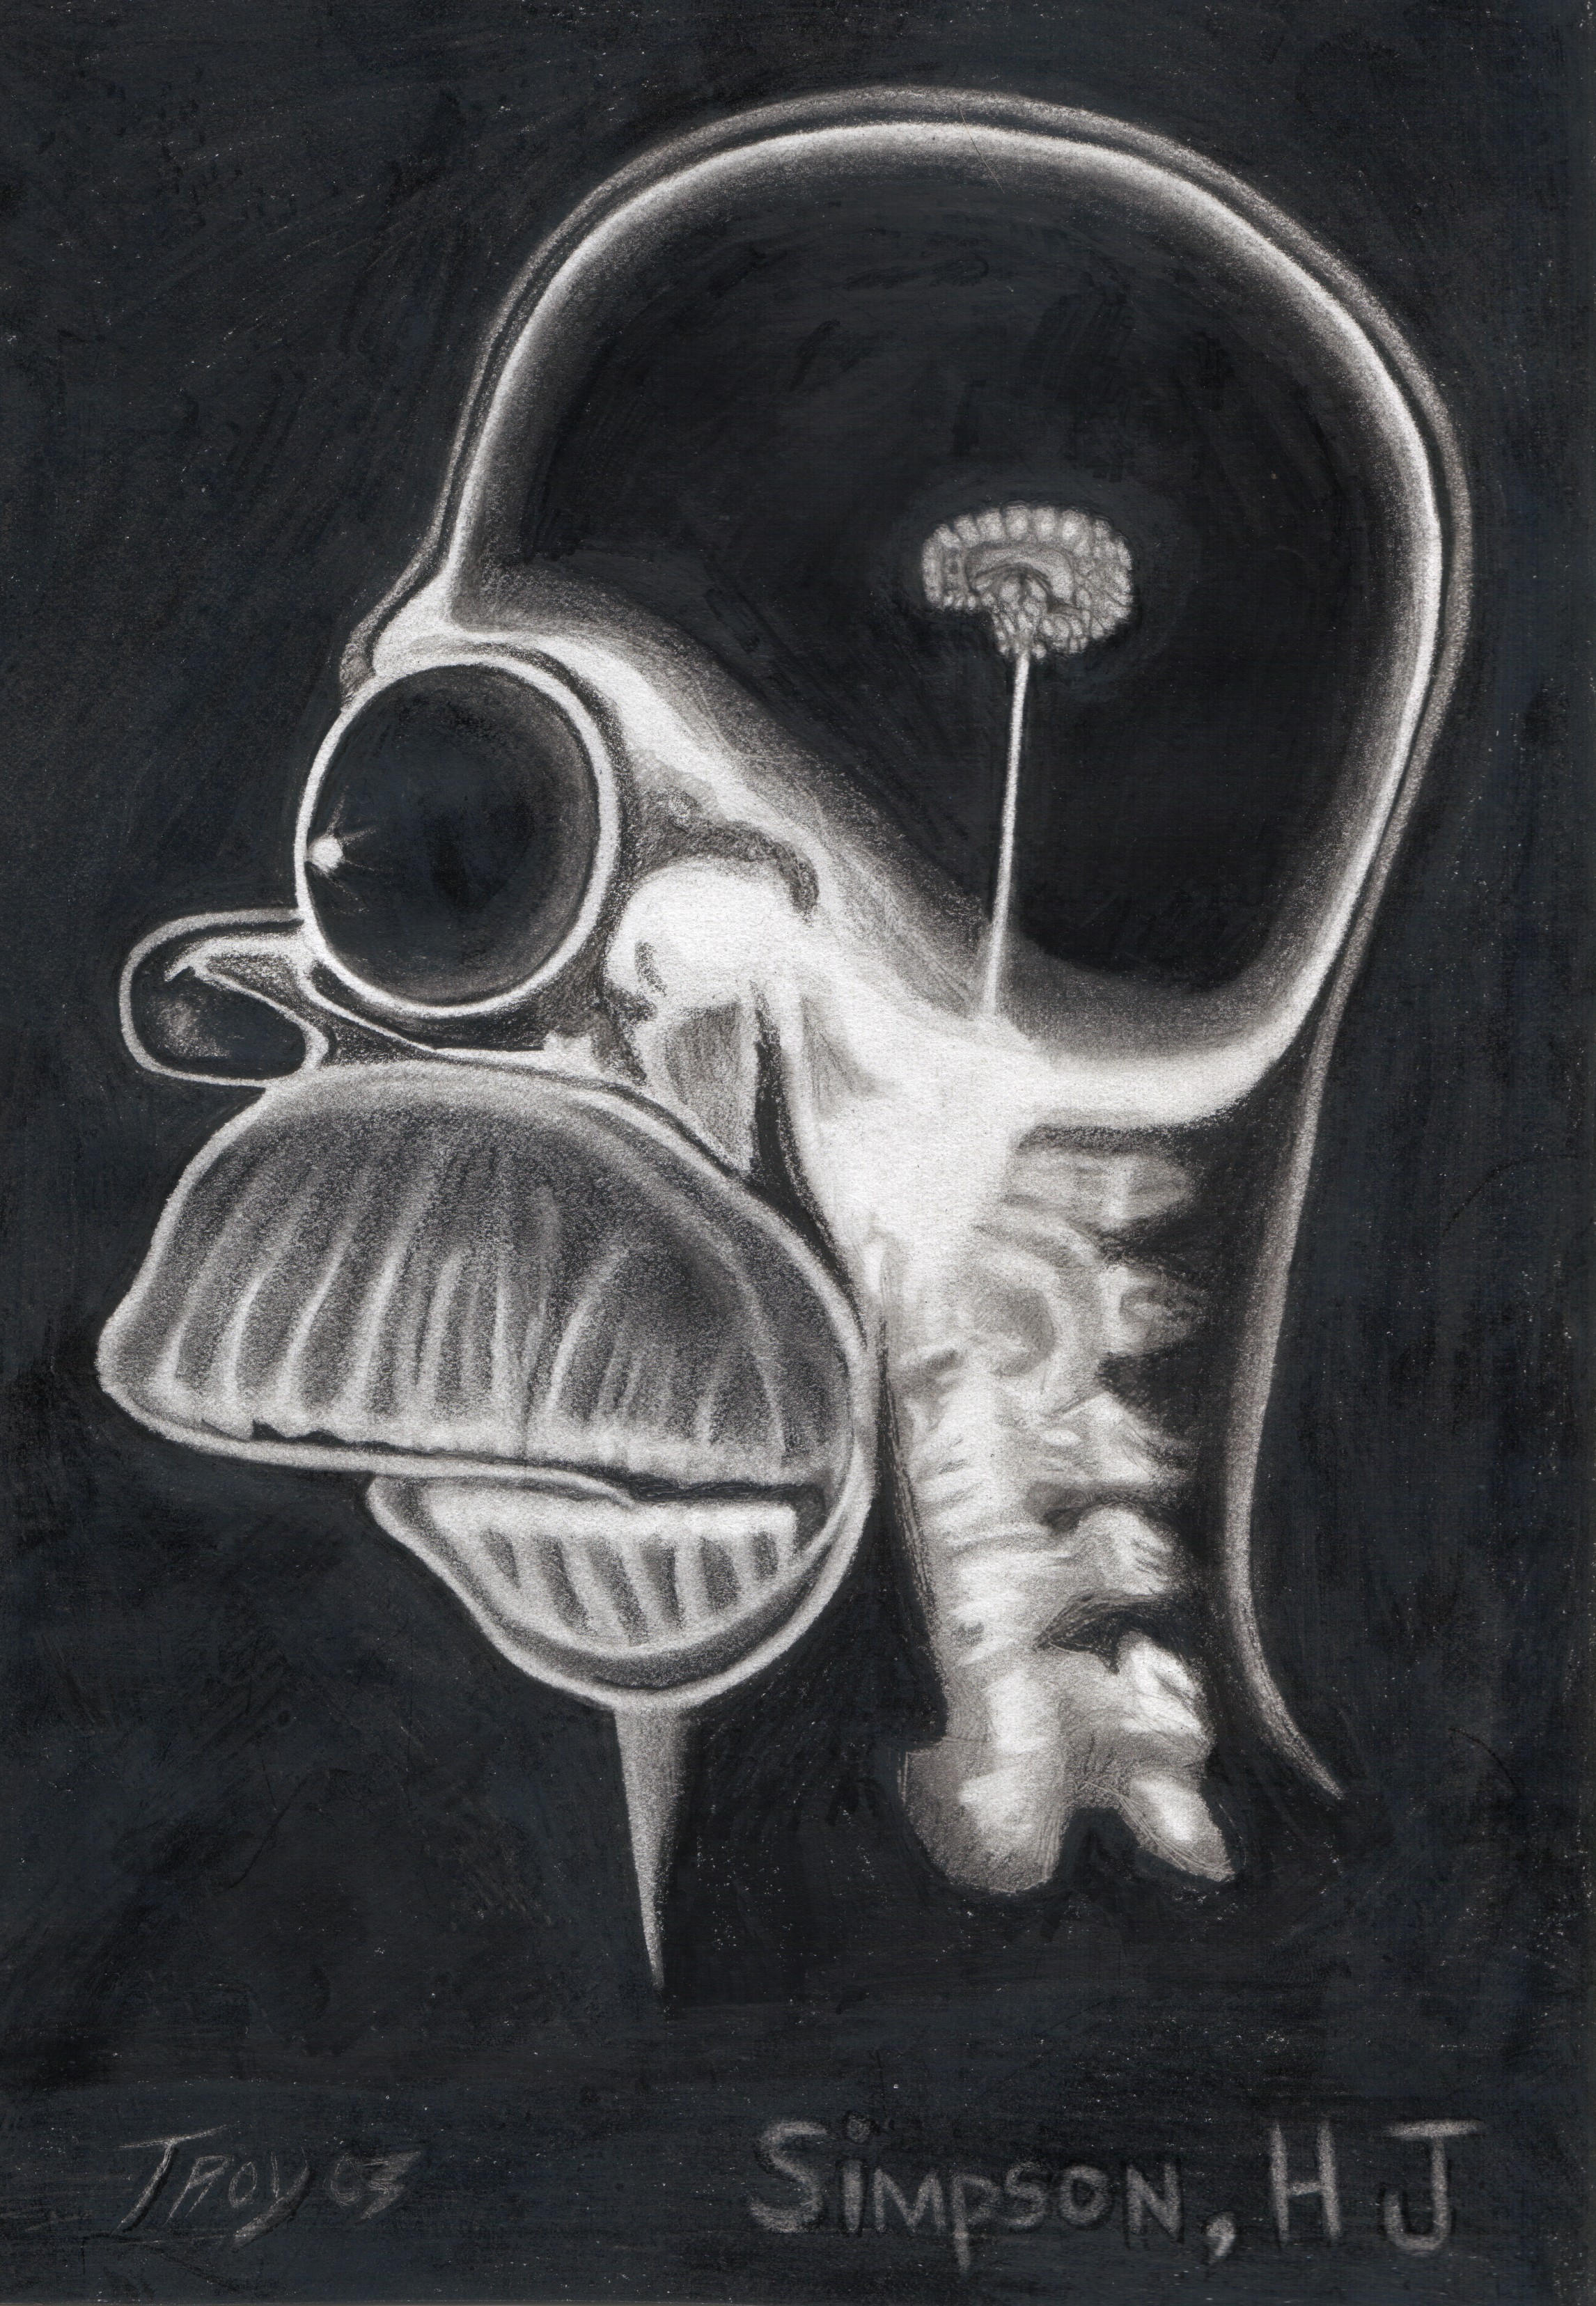 Homers X Ray By Cokeglass On DeviantArt.